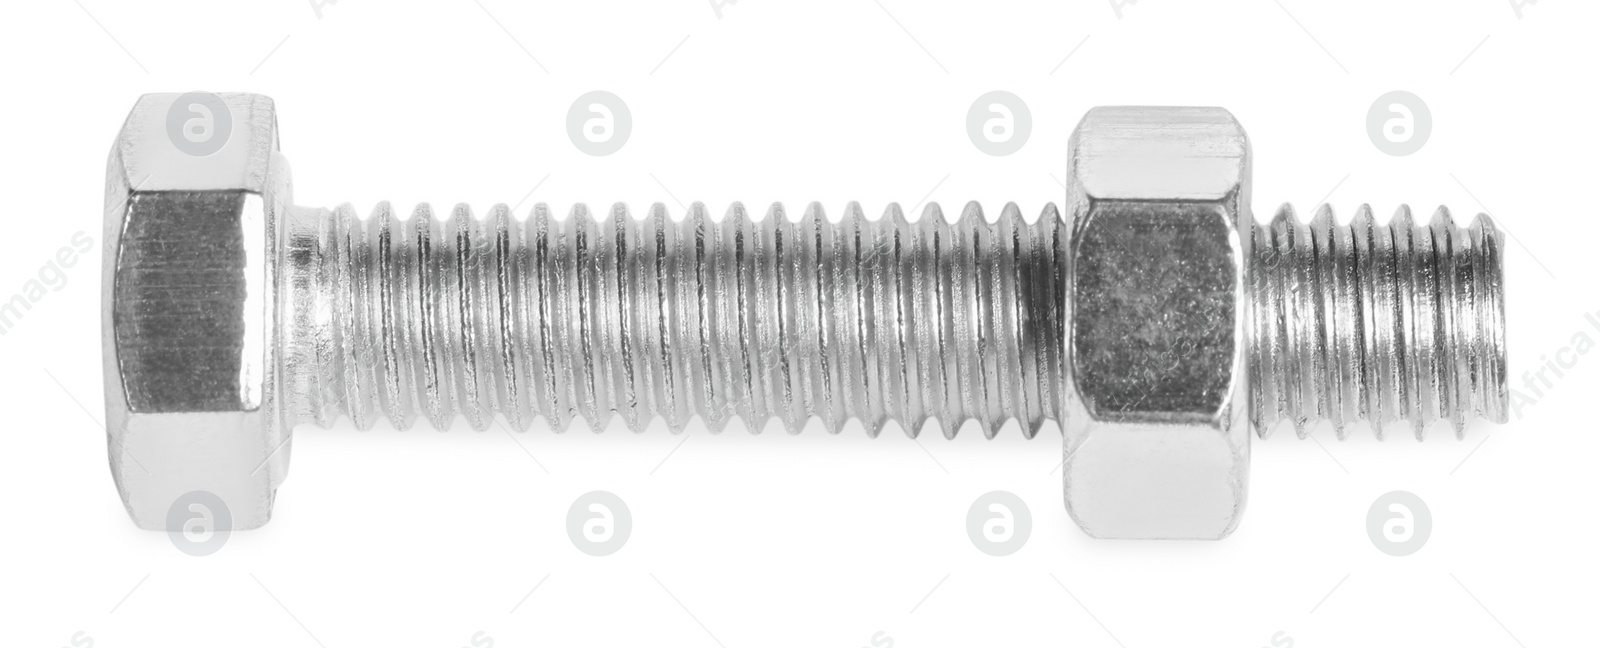 Photo of Metal bolt with hex nut on white background, top view